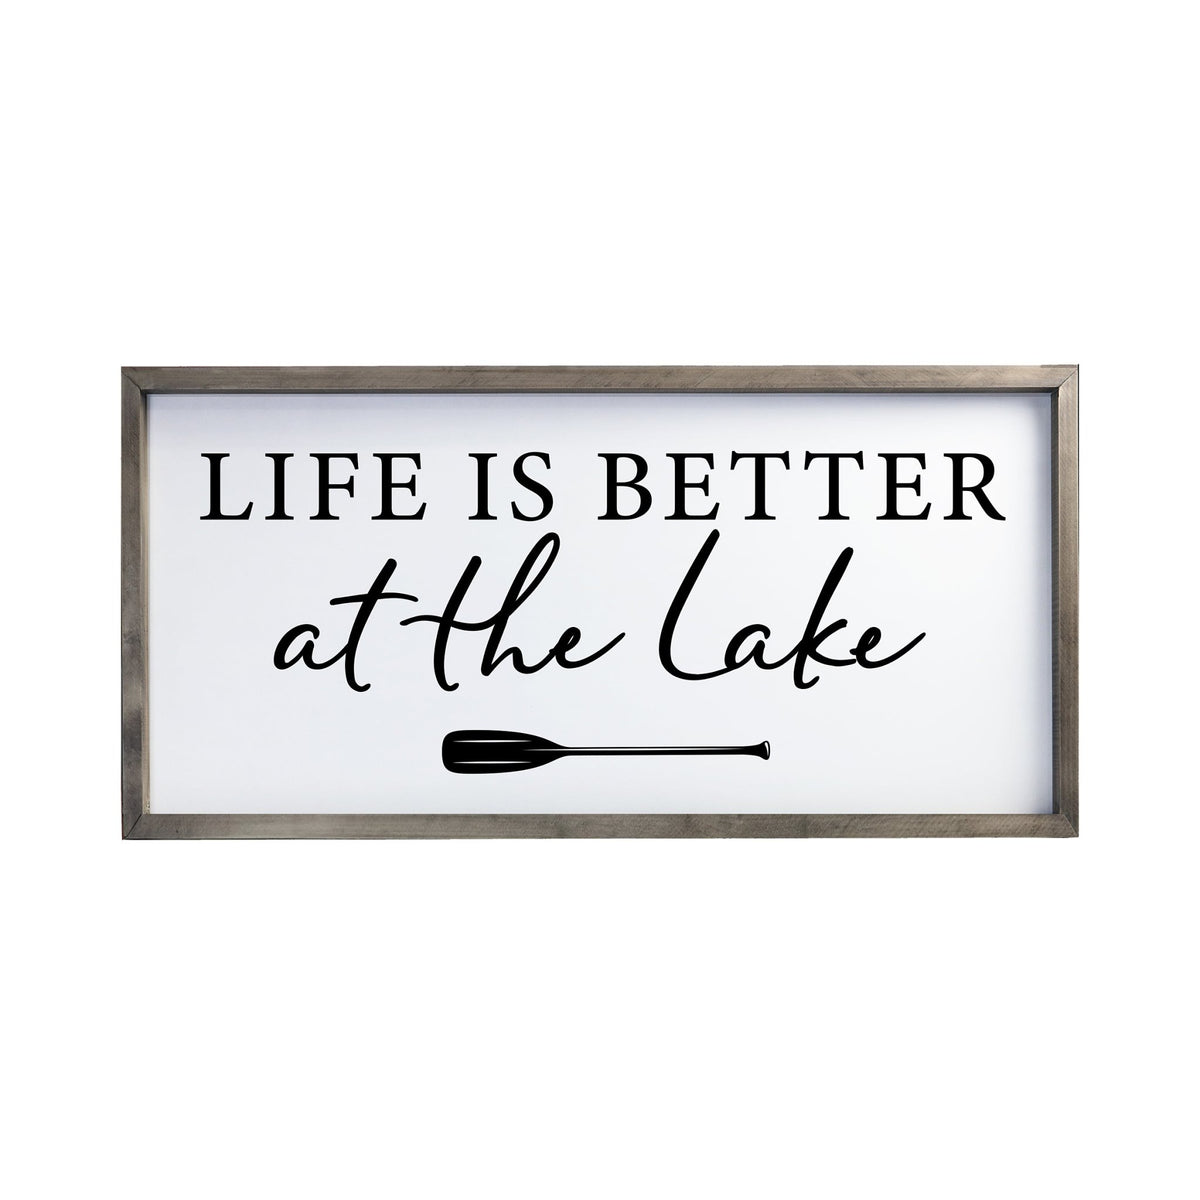 Large Family Wall Decor Quote Sign For Home 18 x 36 - Life Is Better At The Lake - LifeSong Milestones